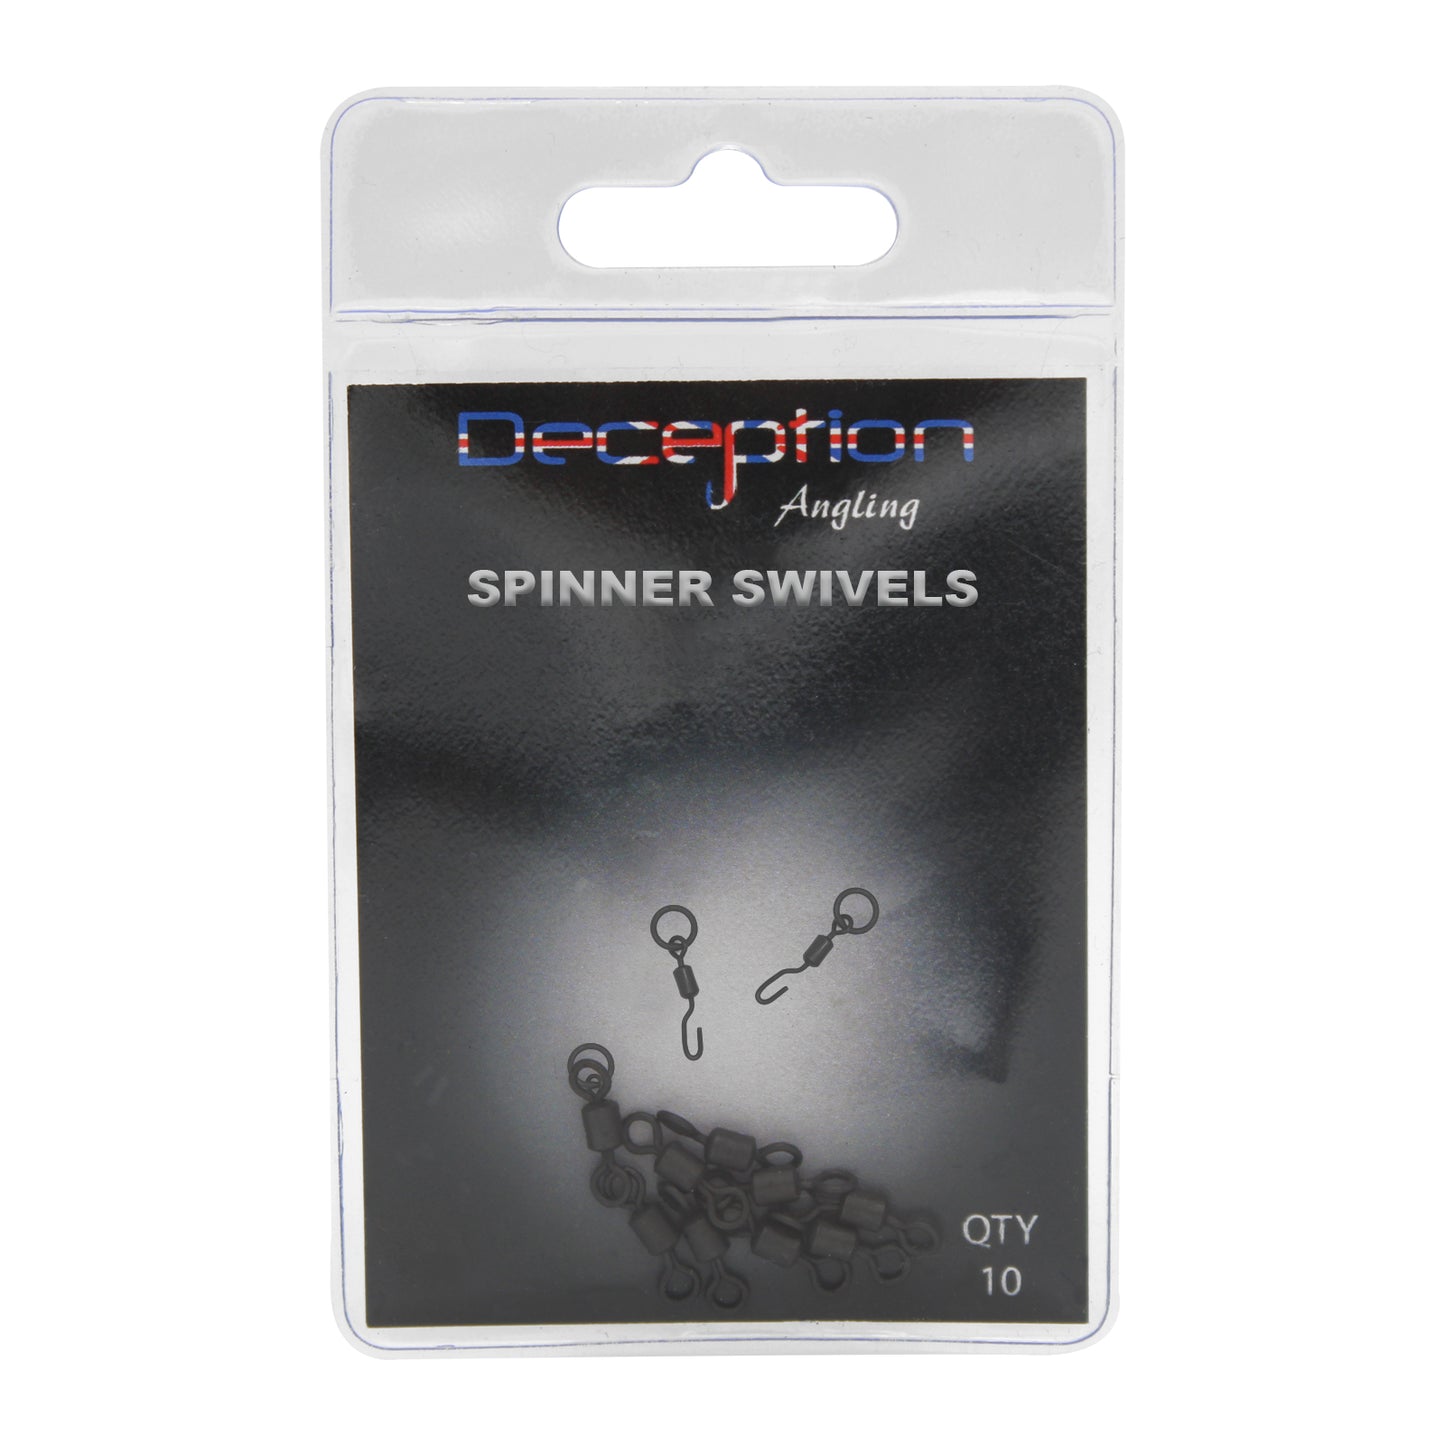 Deception Angling Spinner Swivels Pack of 10